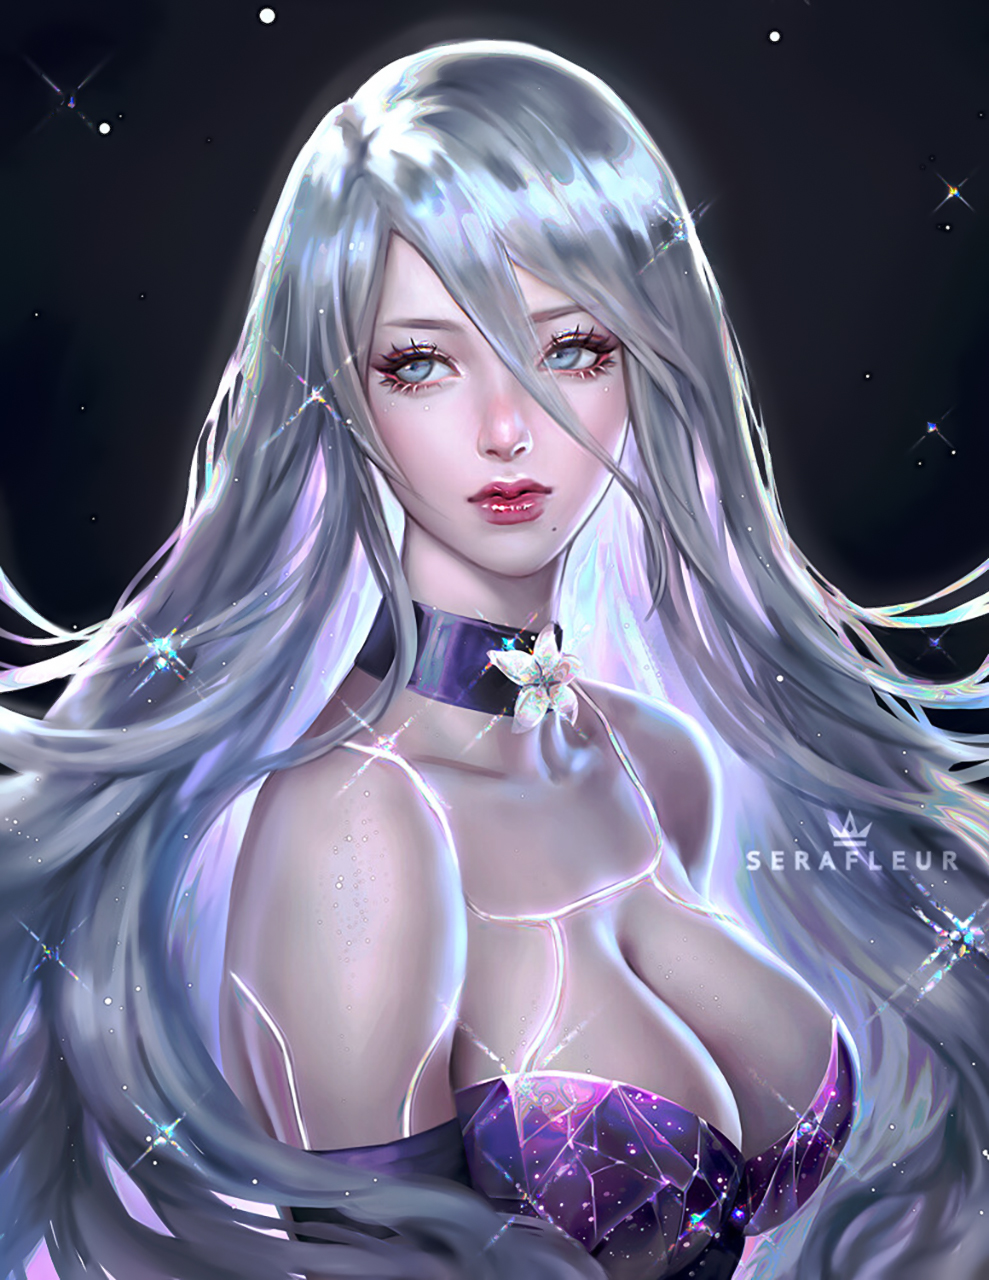 General 989x1280 Abigail Diaz drawing Nier: Automata women androids silver hair long hair blue eyes looking away choker flowers crystal  shining dress purple clothing stars bare shoulders strapless dress glitter hair A2 (Nier: Automata) digital art portrait display watermarked